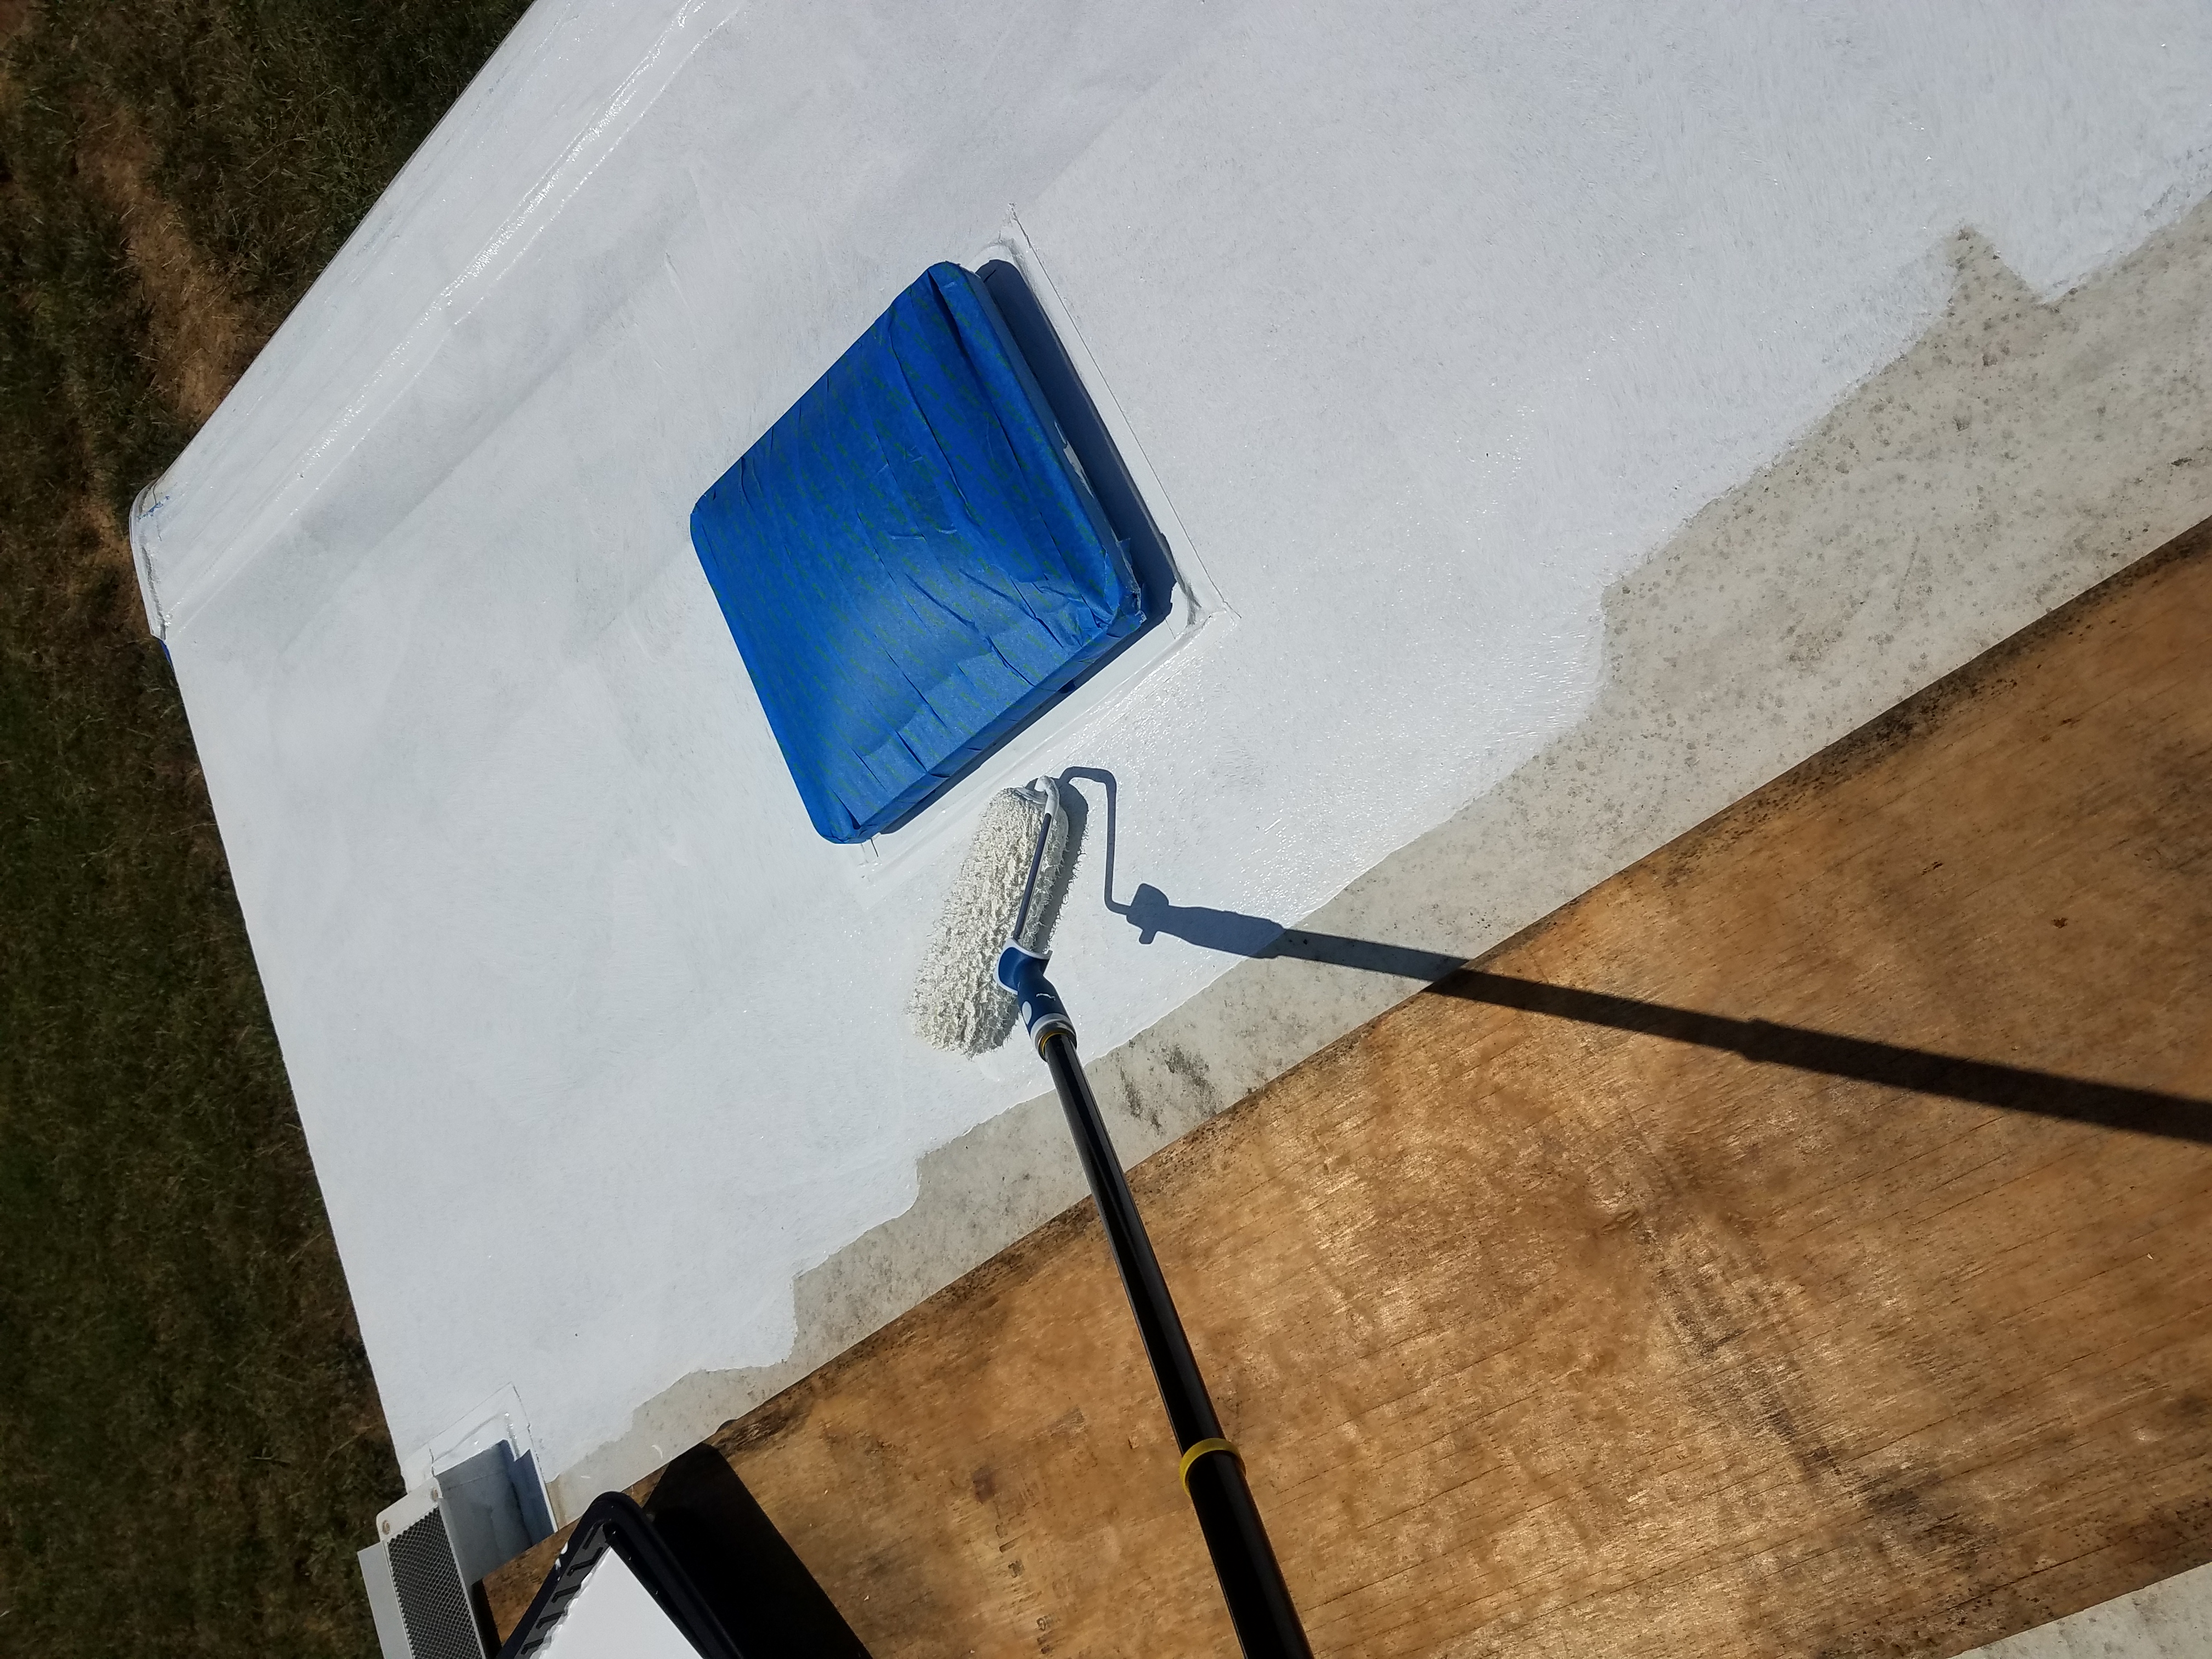 Painting the roof of the travel trailer with a long-handeled roller while standing on plywood